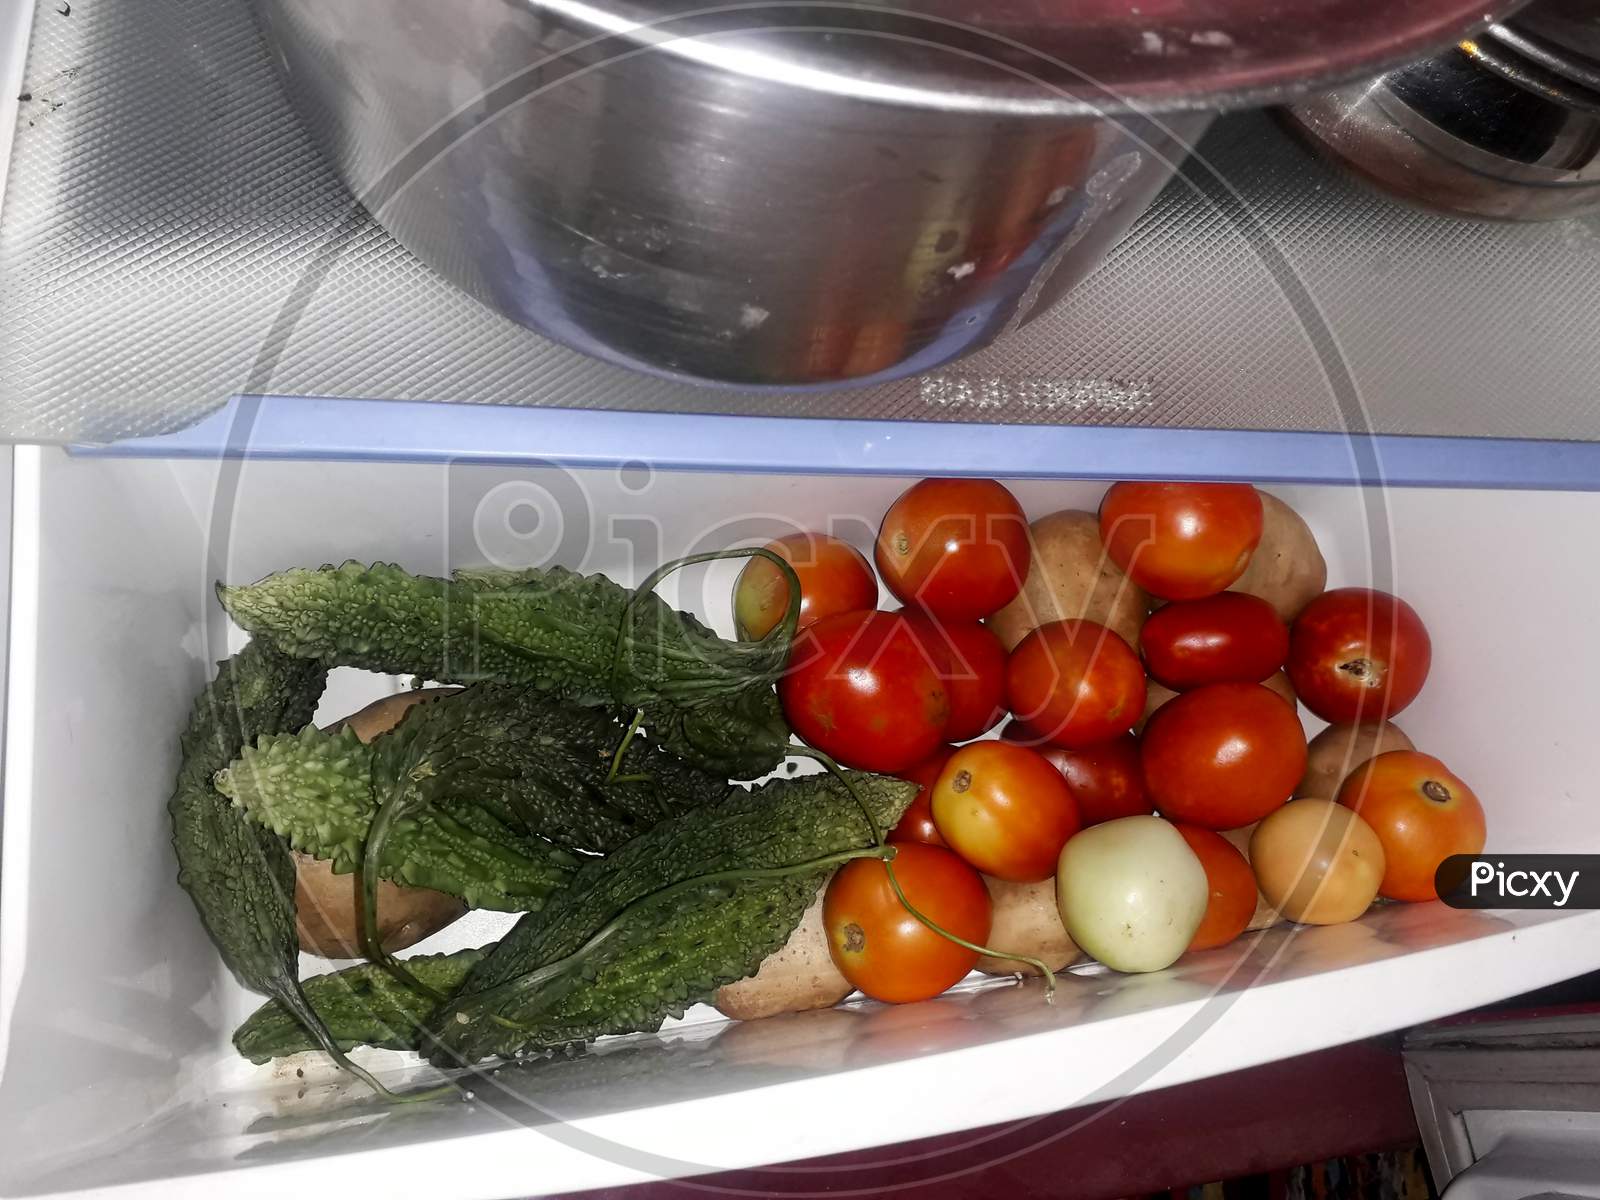 fresh tomatoes, potatoes and bitter gourd in the vegetable section or vessel of a refrigerator